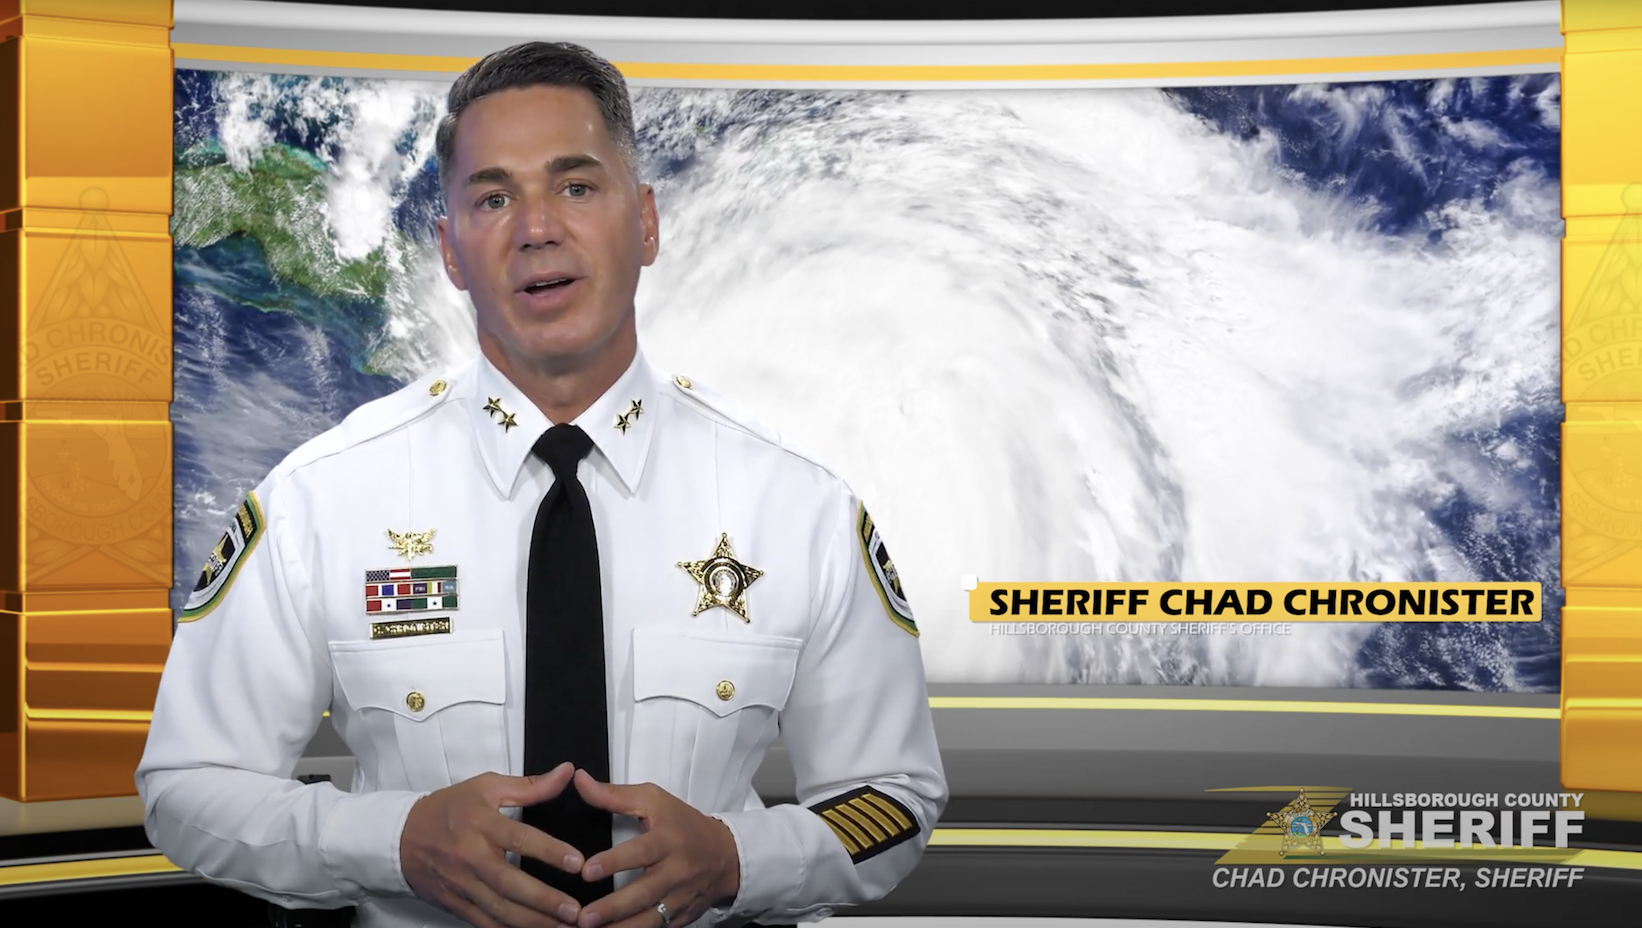 Sheriff Chad Chronister asking residents to get storm ready